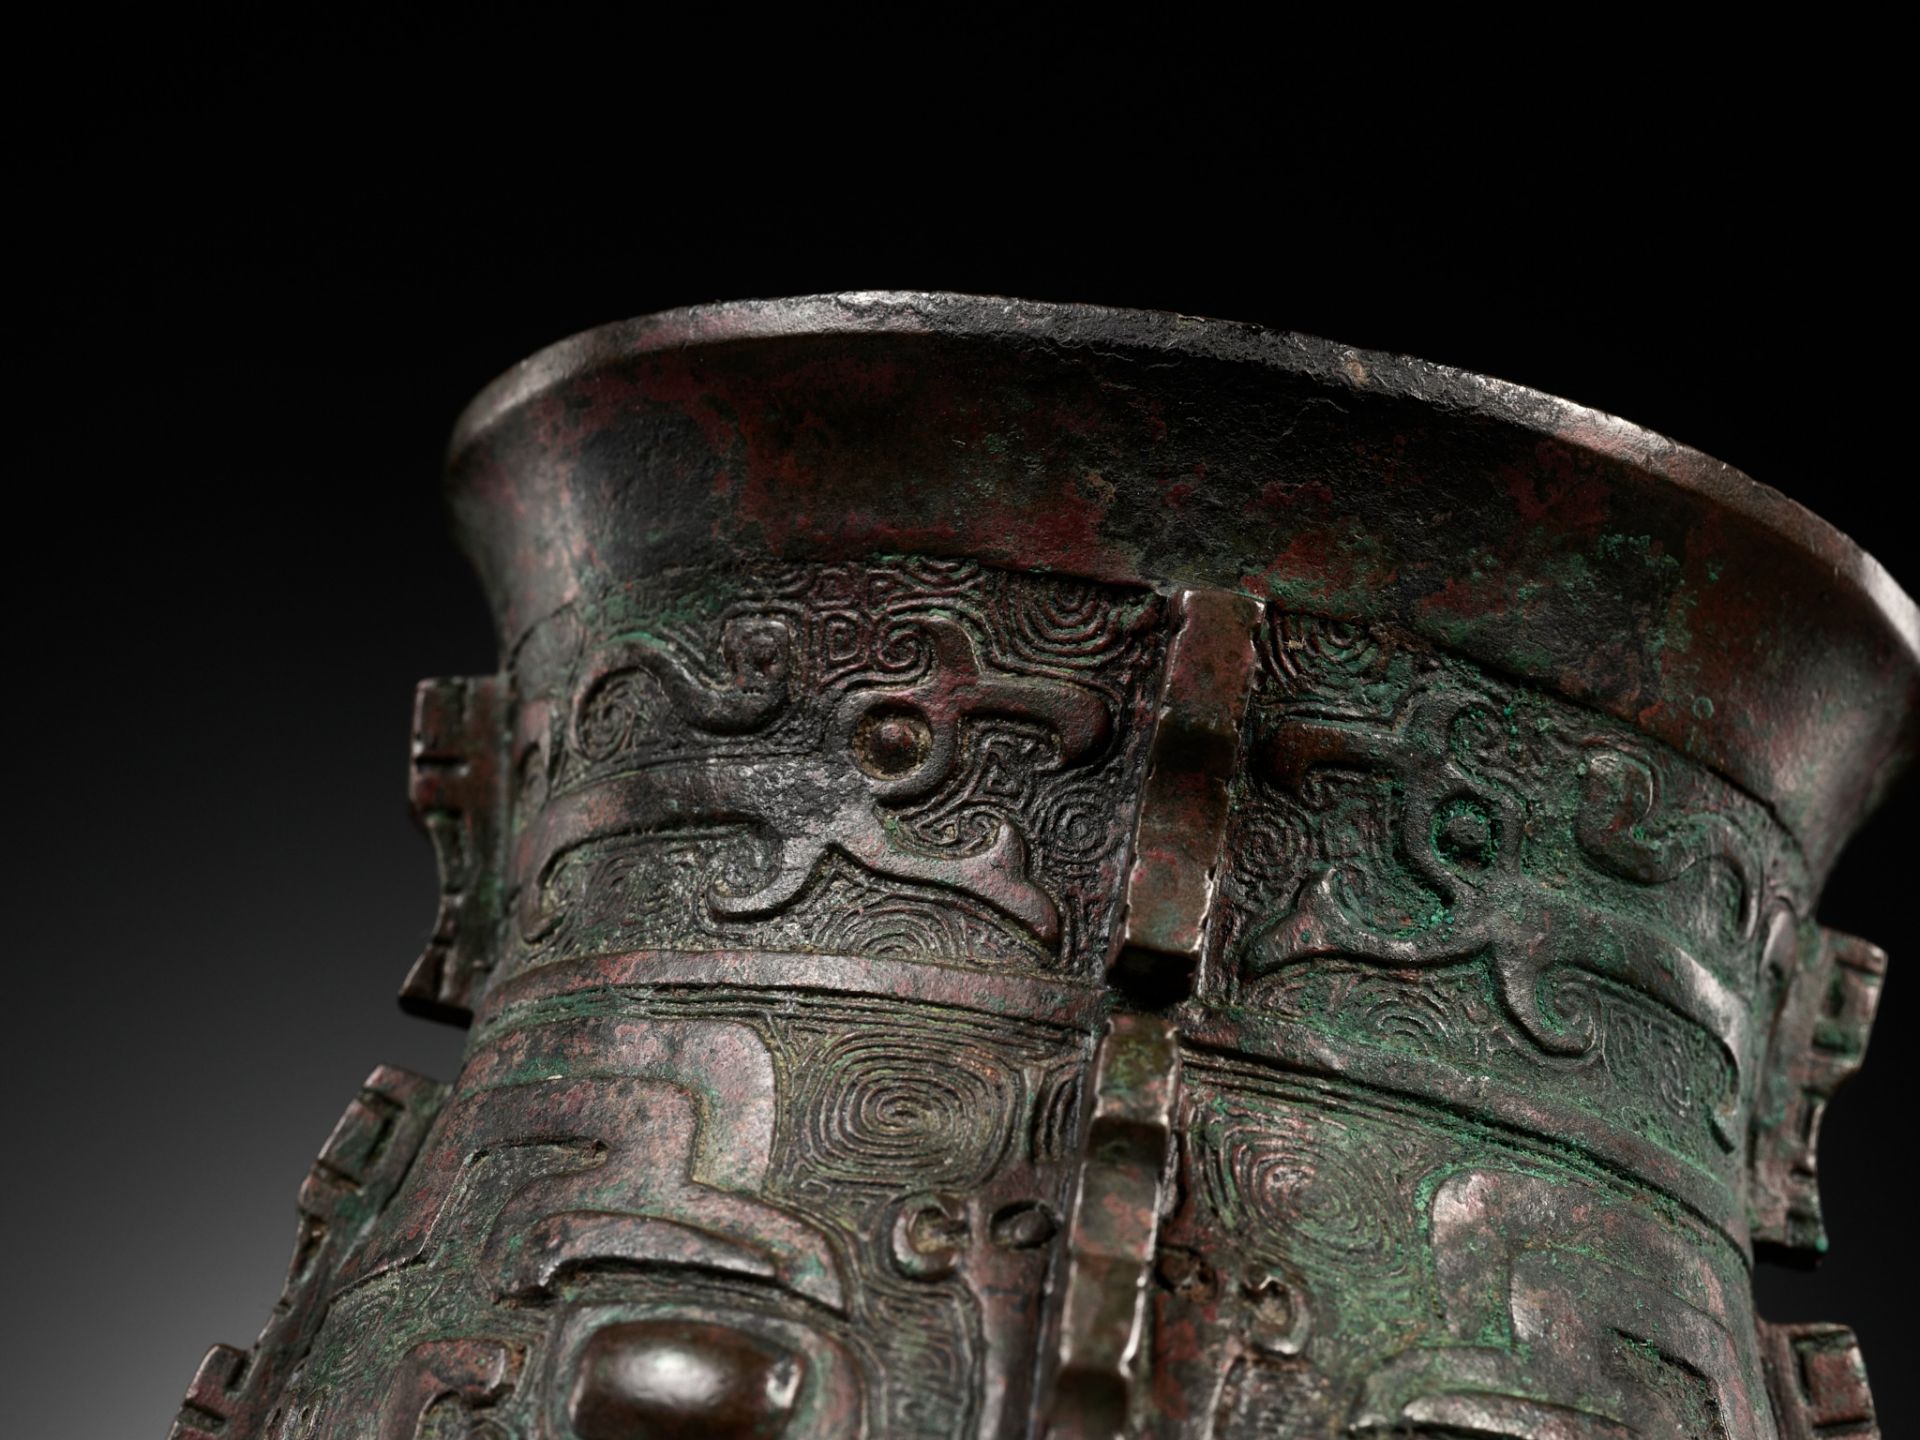 A RARE BRONZE RITUAL WINE VESSEL, ZHI, SHANG DYNASTY, CHINA, 13TH-12TH CENTURY BC - Image 21 of 25